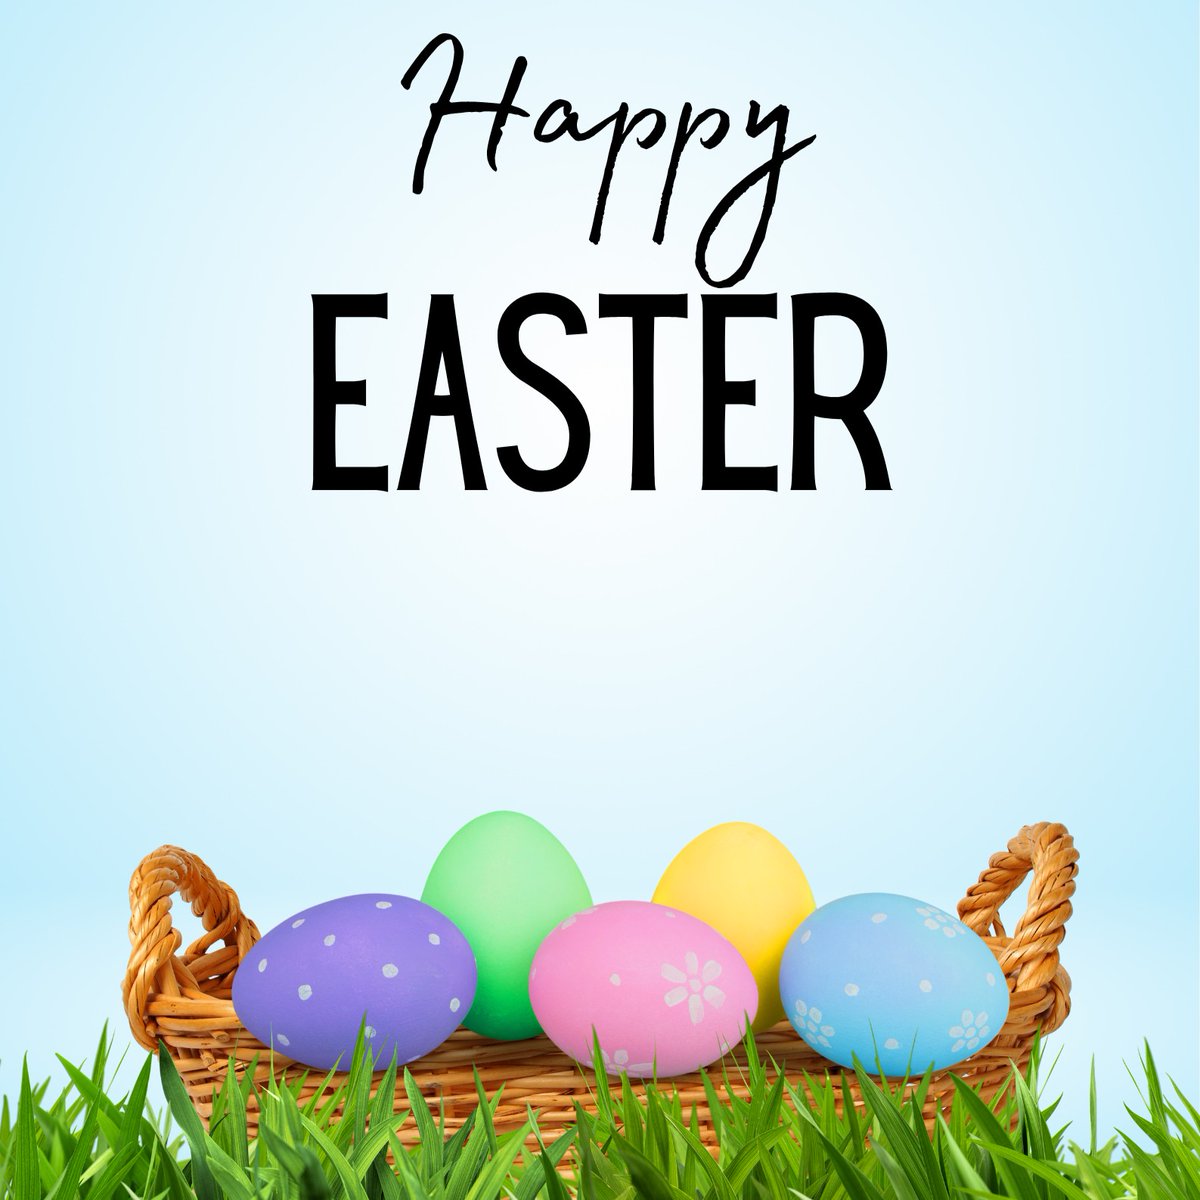 Wishing a happy Easter to all those who celebrate!